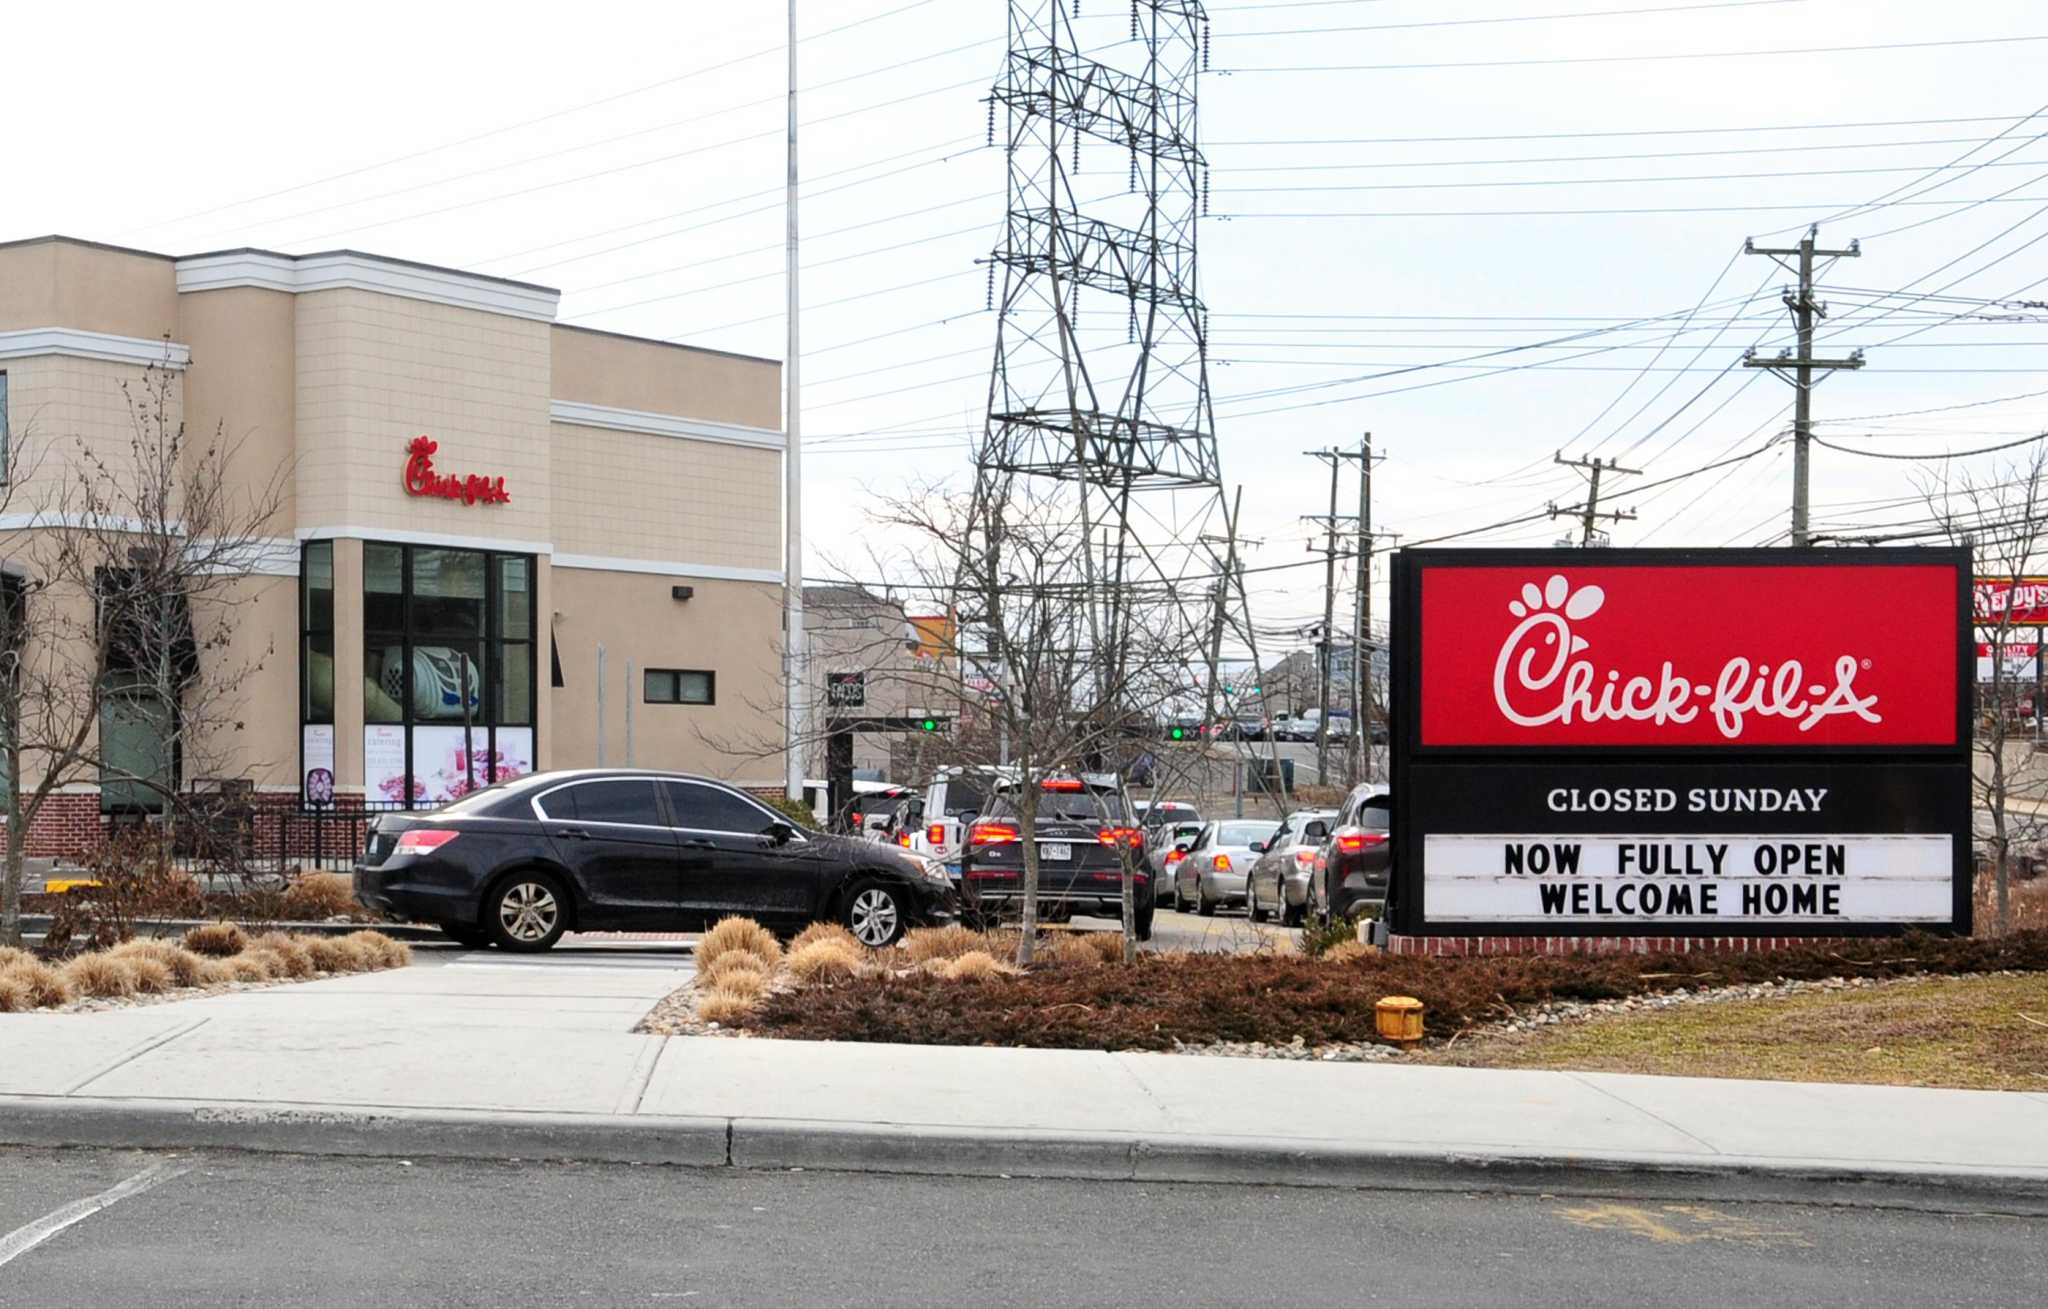 Norwalk’s Chick-fil-A to reopen Dec. 14 after drive-thru renovation